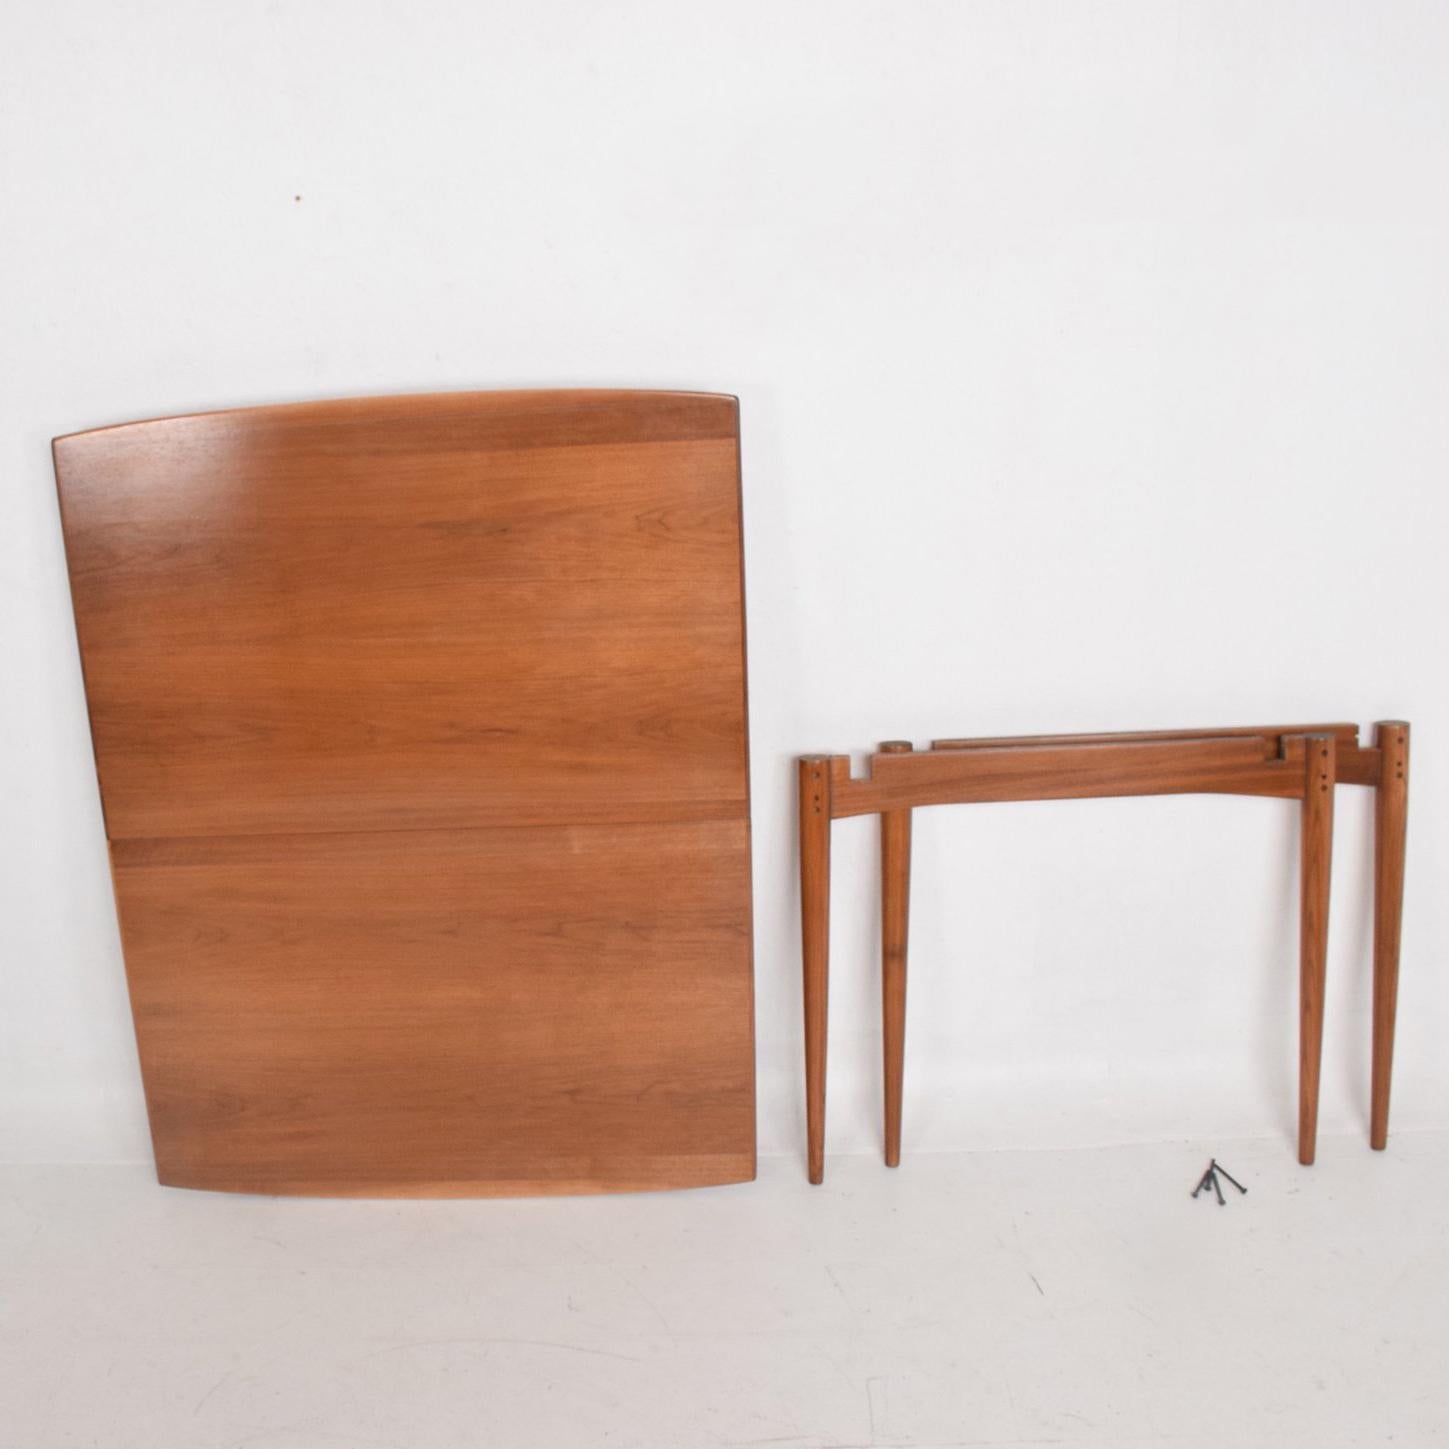 For your consideration a Mid-Century Modern walnut dining table. 
The table features a 30